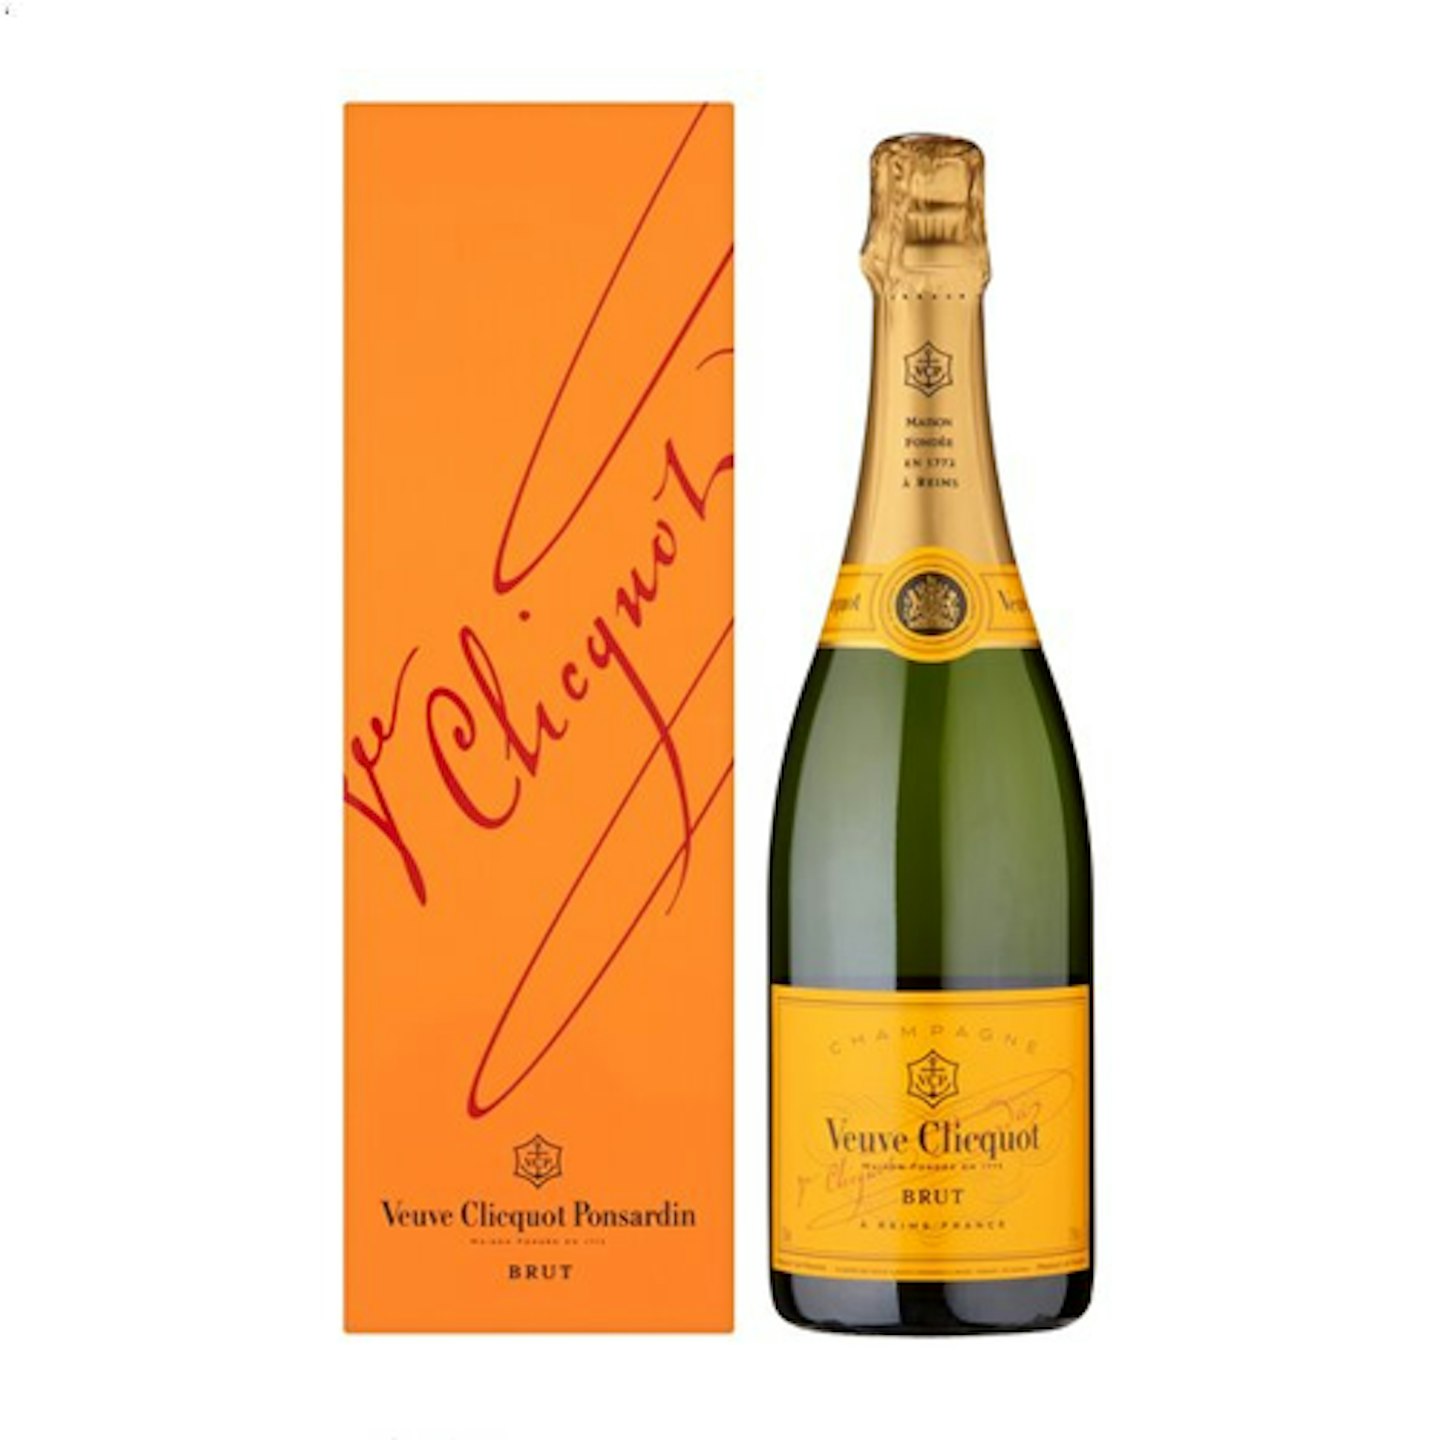 Veuve Clicquot Brut Yellow Label Champagne from Tesco